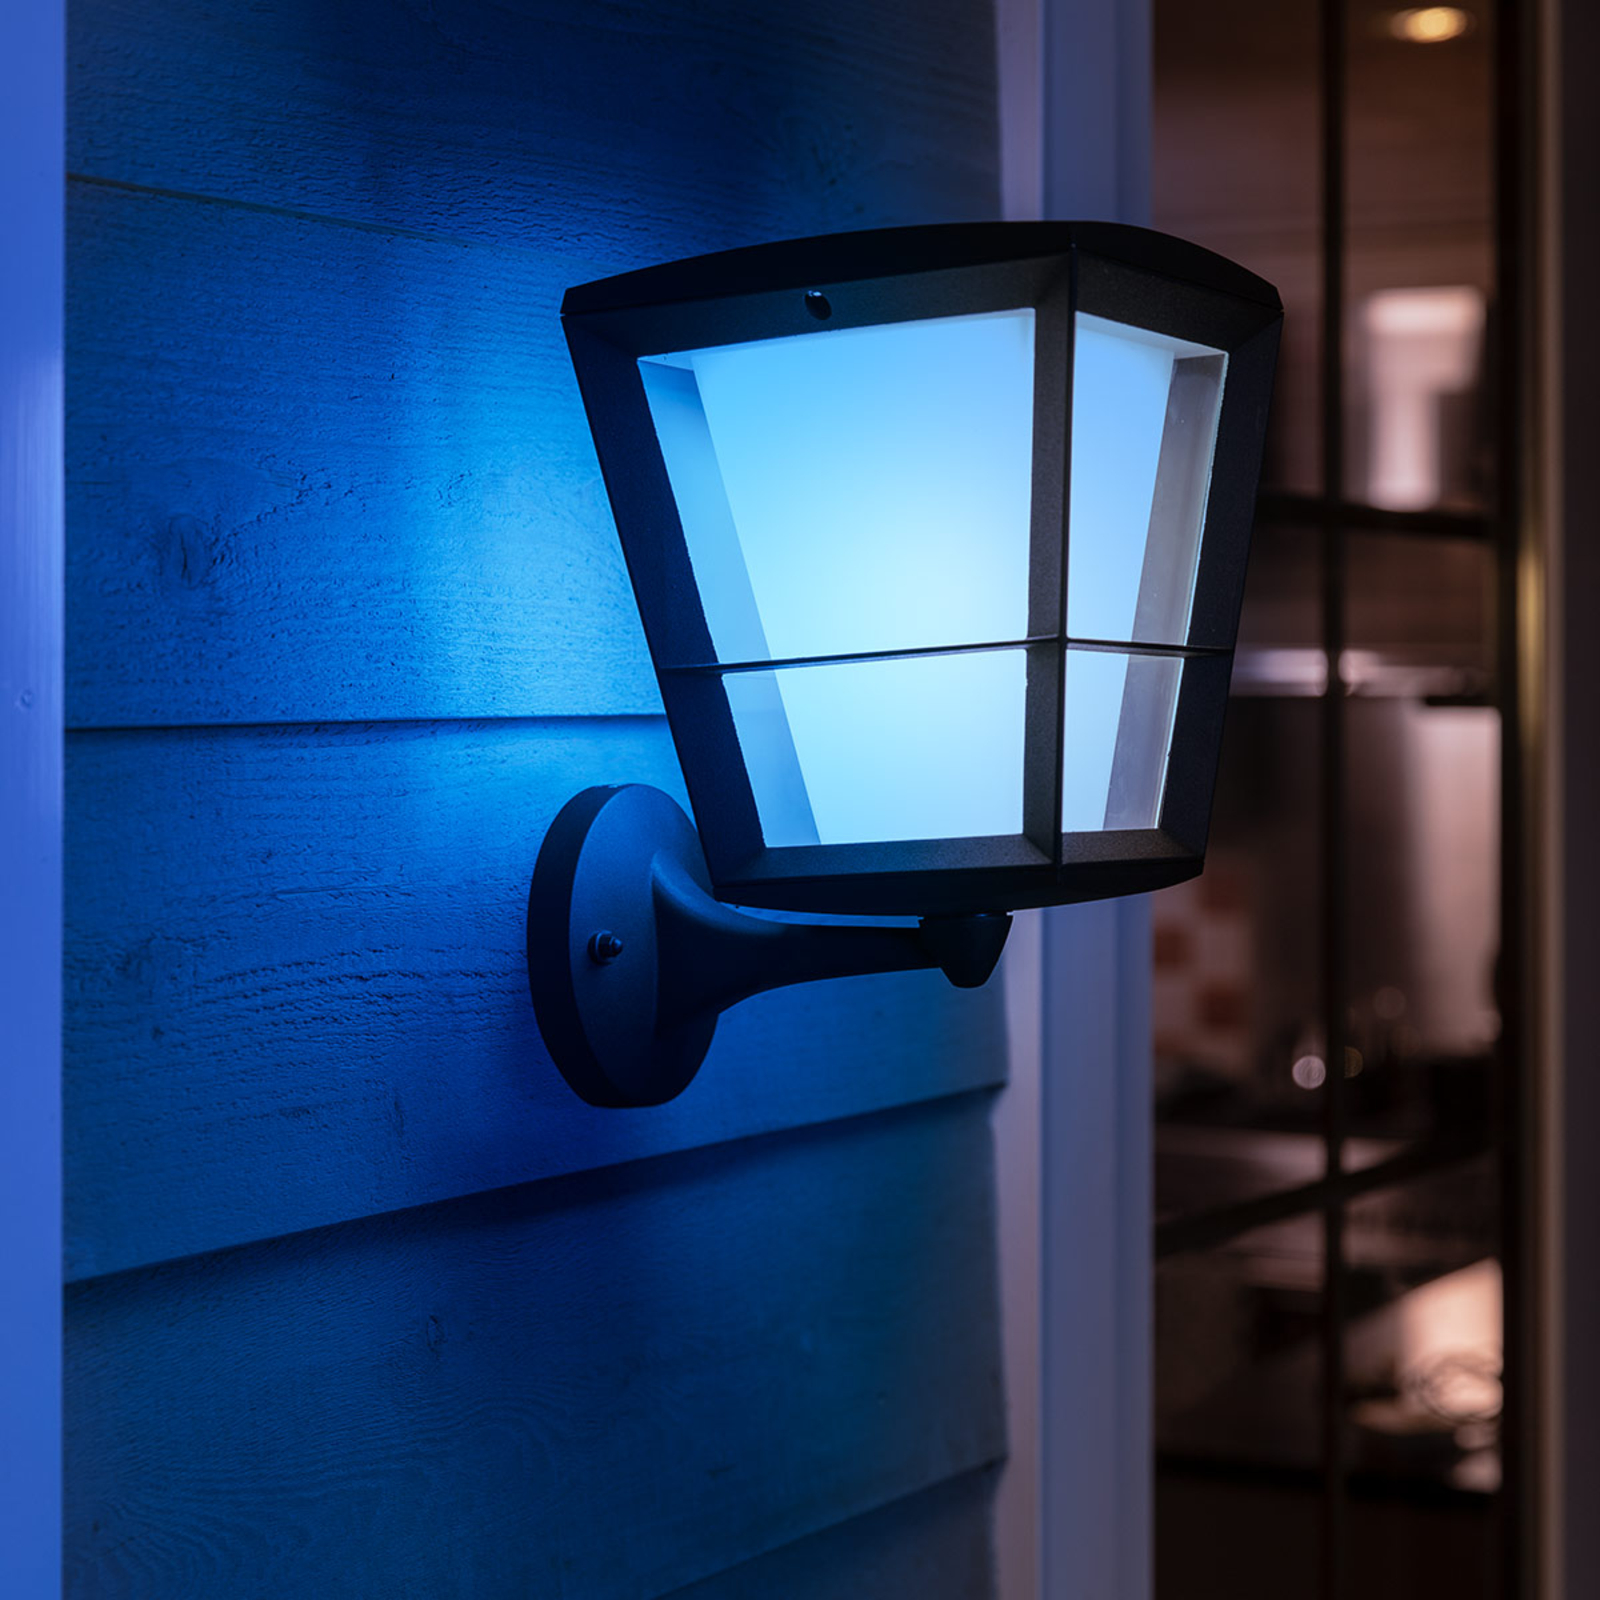 Philips Hue White+Color Econic wall light, above